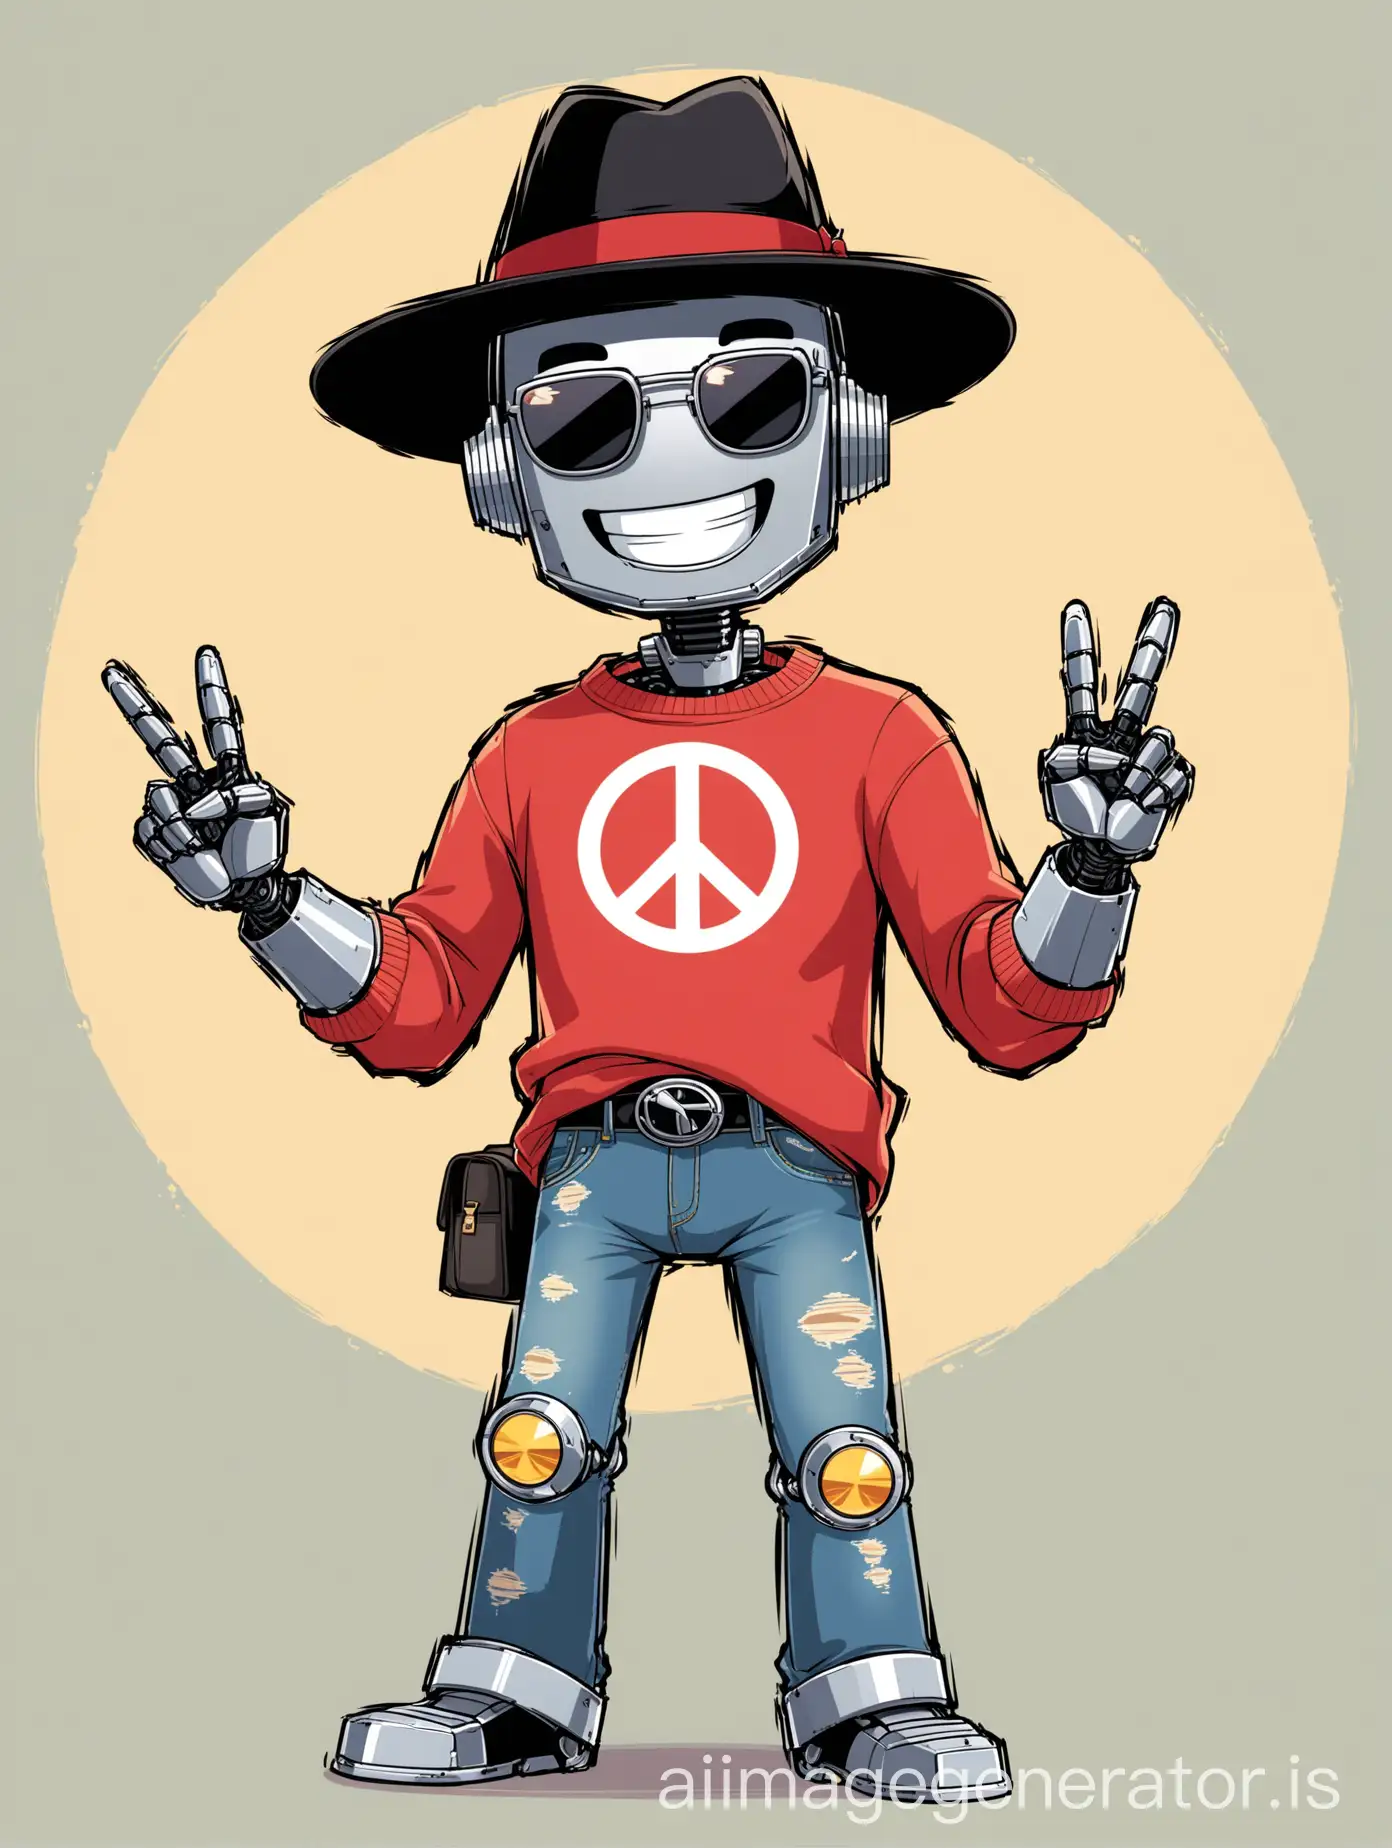 A silver robot man has a black fedora hat and wears a red sweater, ripped jeans (with sunglasses), smiling (opens his mouth), and a peace sign In Cartoon Animation